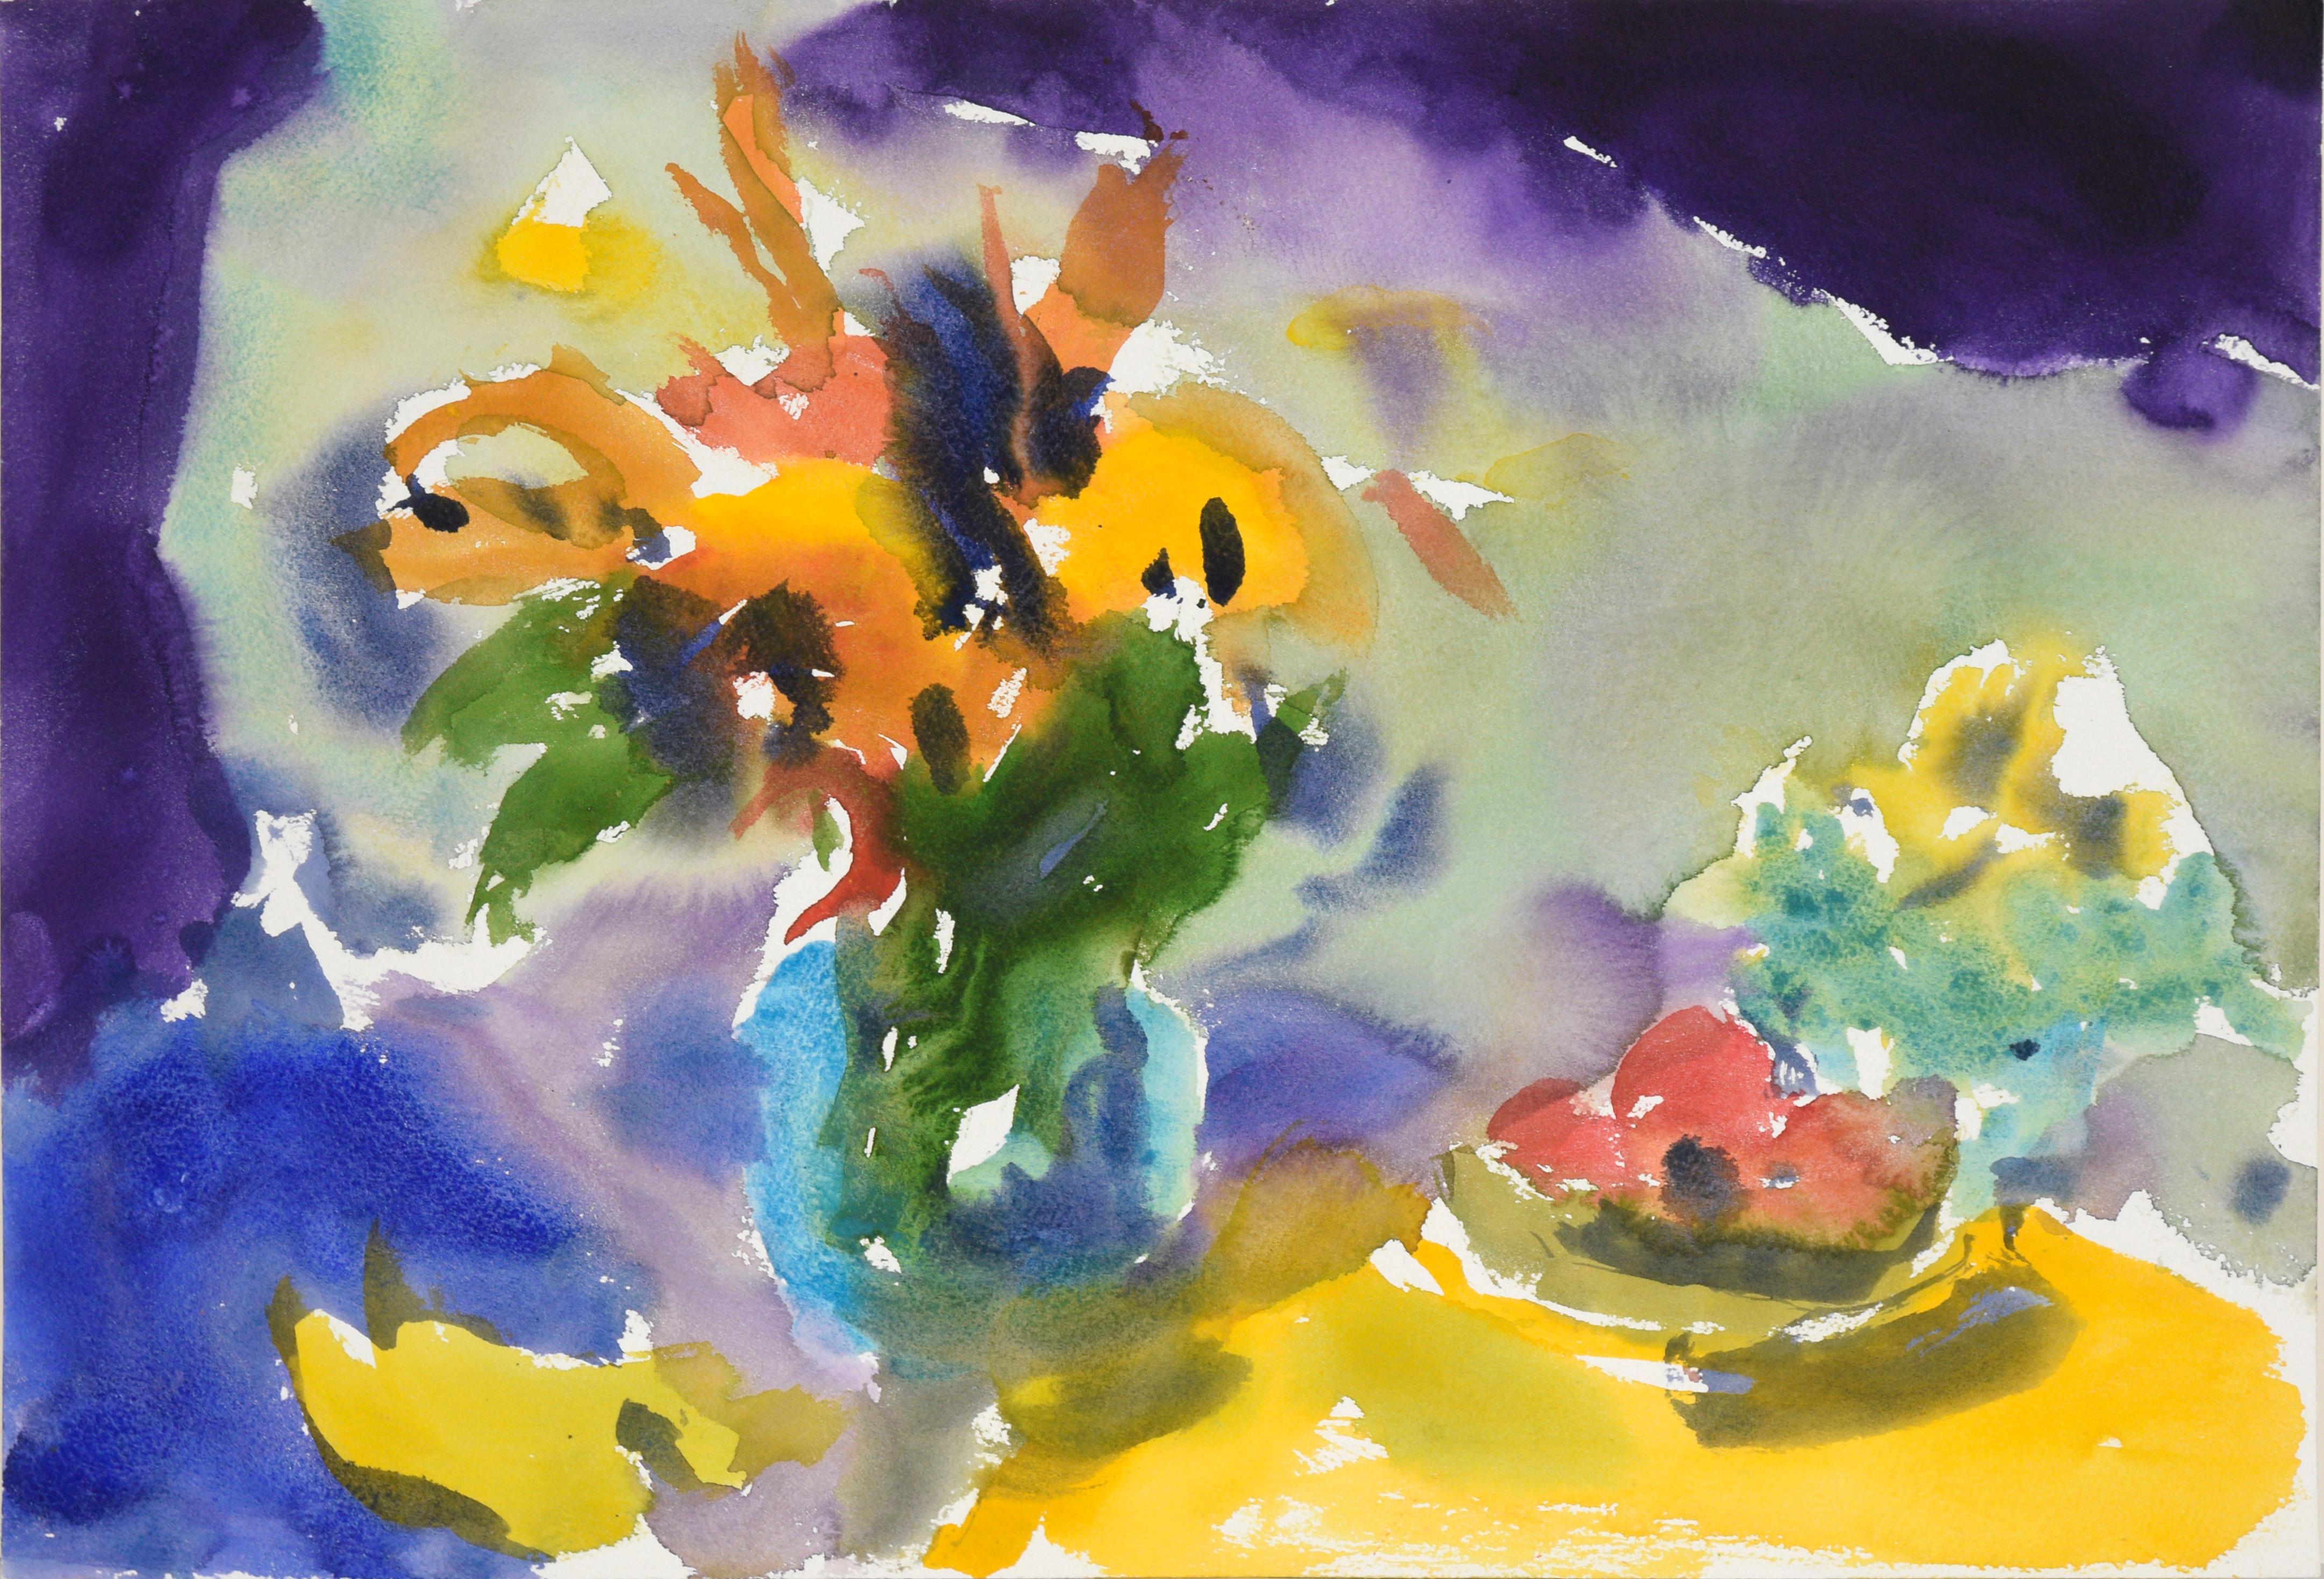 Abstract Still Life with Bouquets and Fruit in Watercolor on Paper